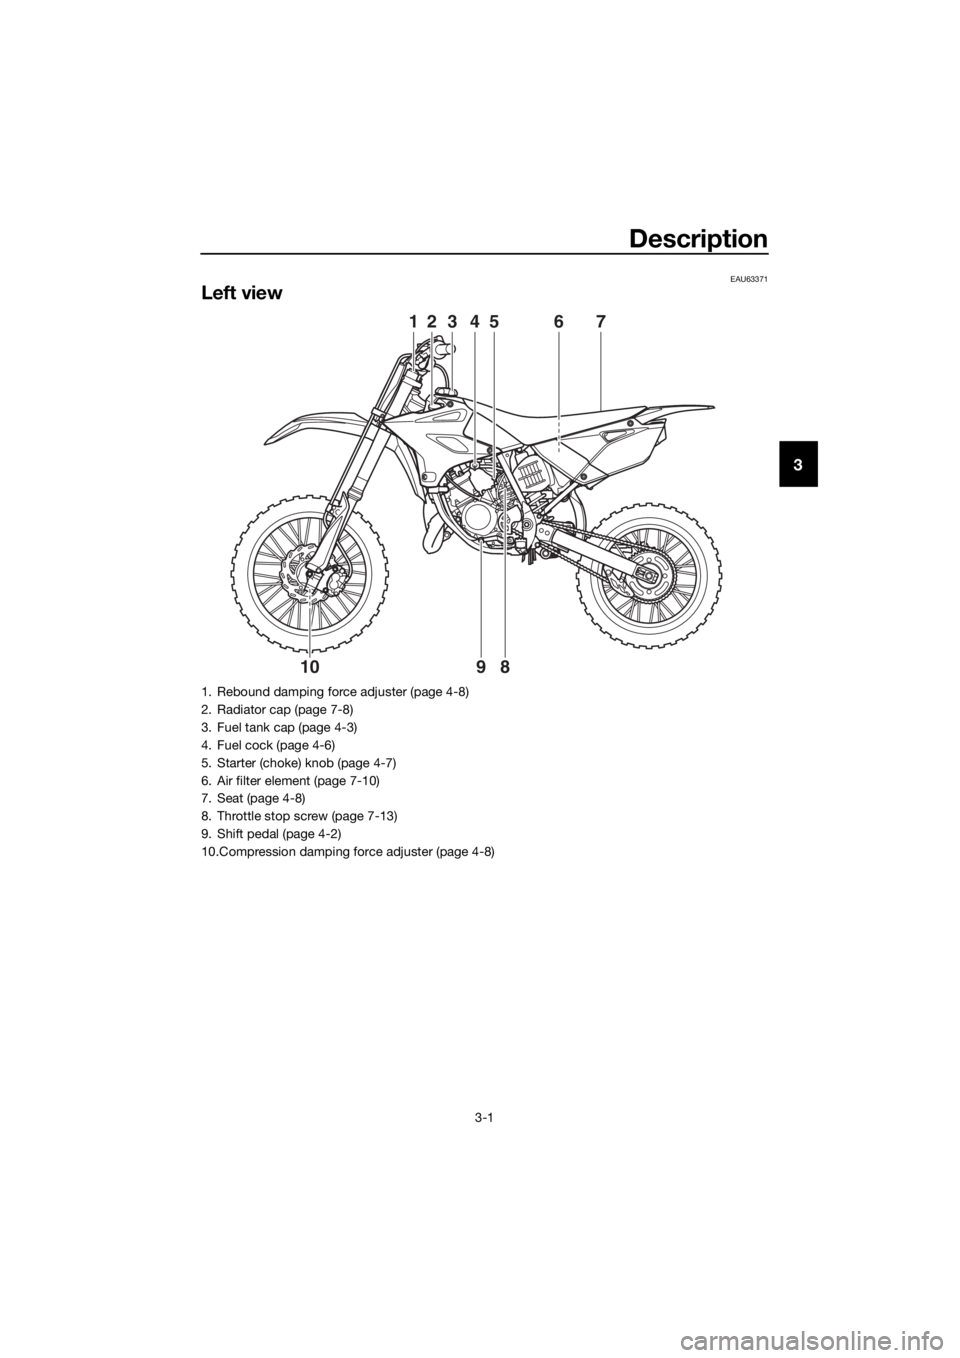 YAMAHA YZ85 2019  Owners Manual Description
3-1
3
EAU63371
Left view
6745231
8910
1. Rebound damping force adjuster (page 4-8)
2. Radiator cap (page 7-8)
3. Fuel tank cap (page 4-3)
4. Fuel cock (page 4-6)
5. Starter (choke) knob (p